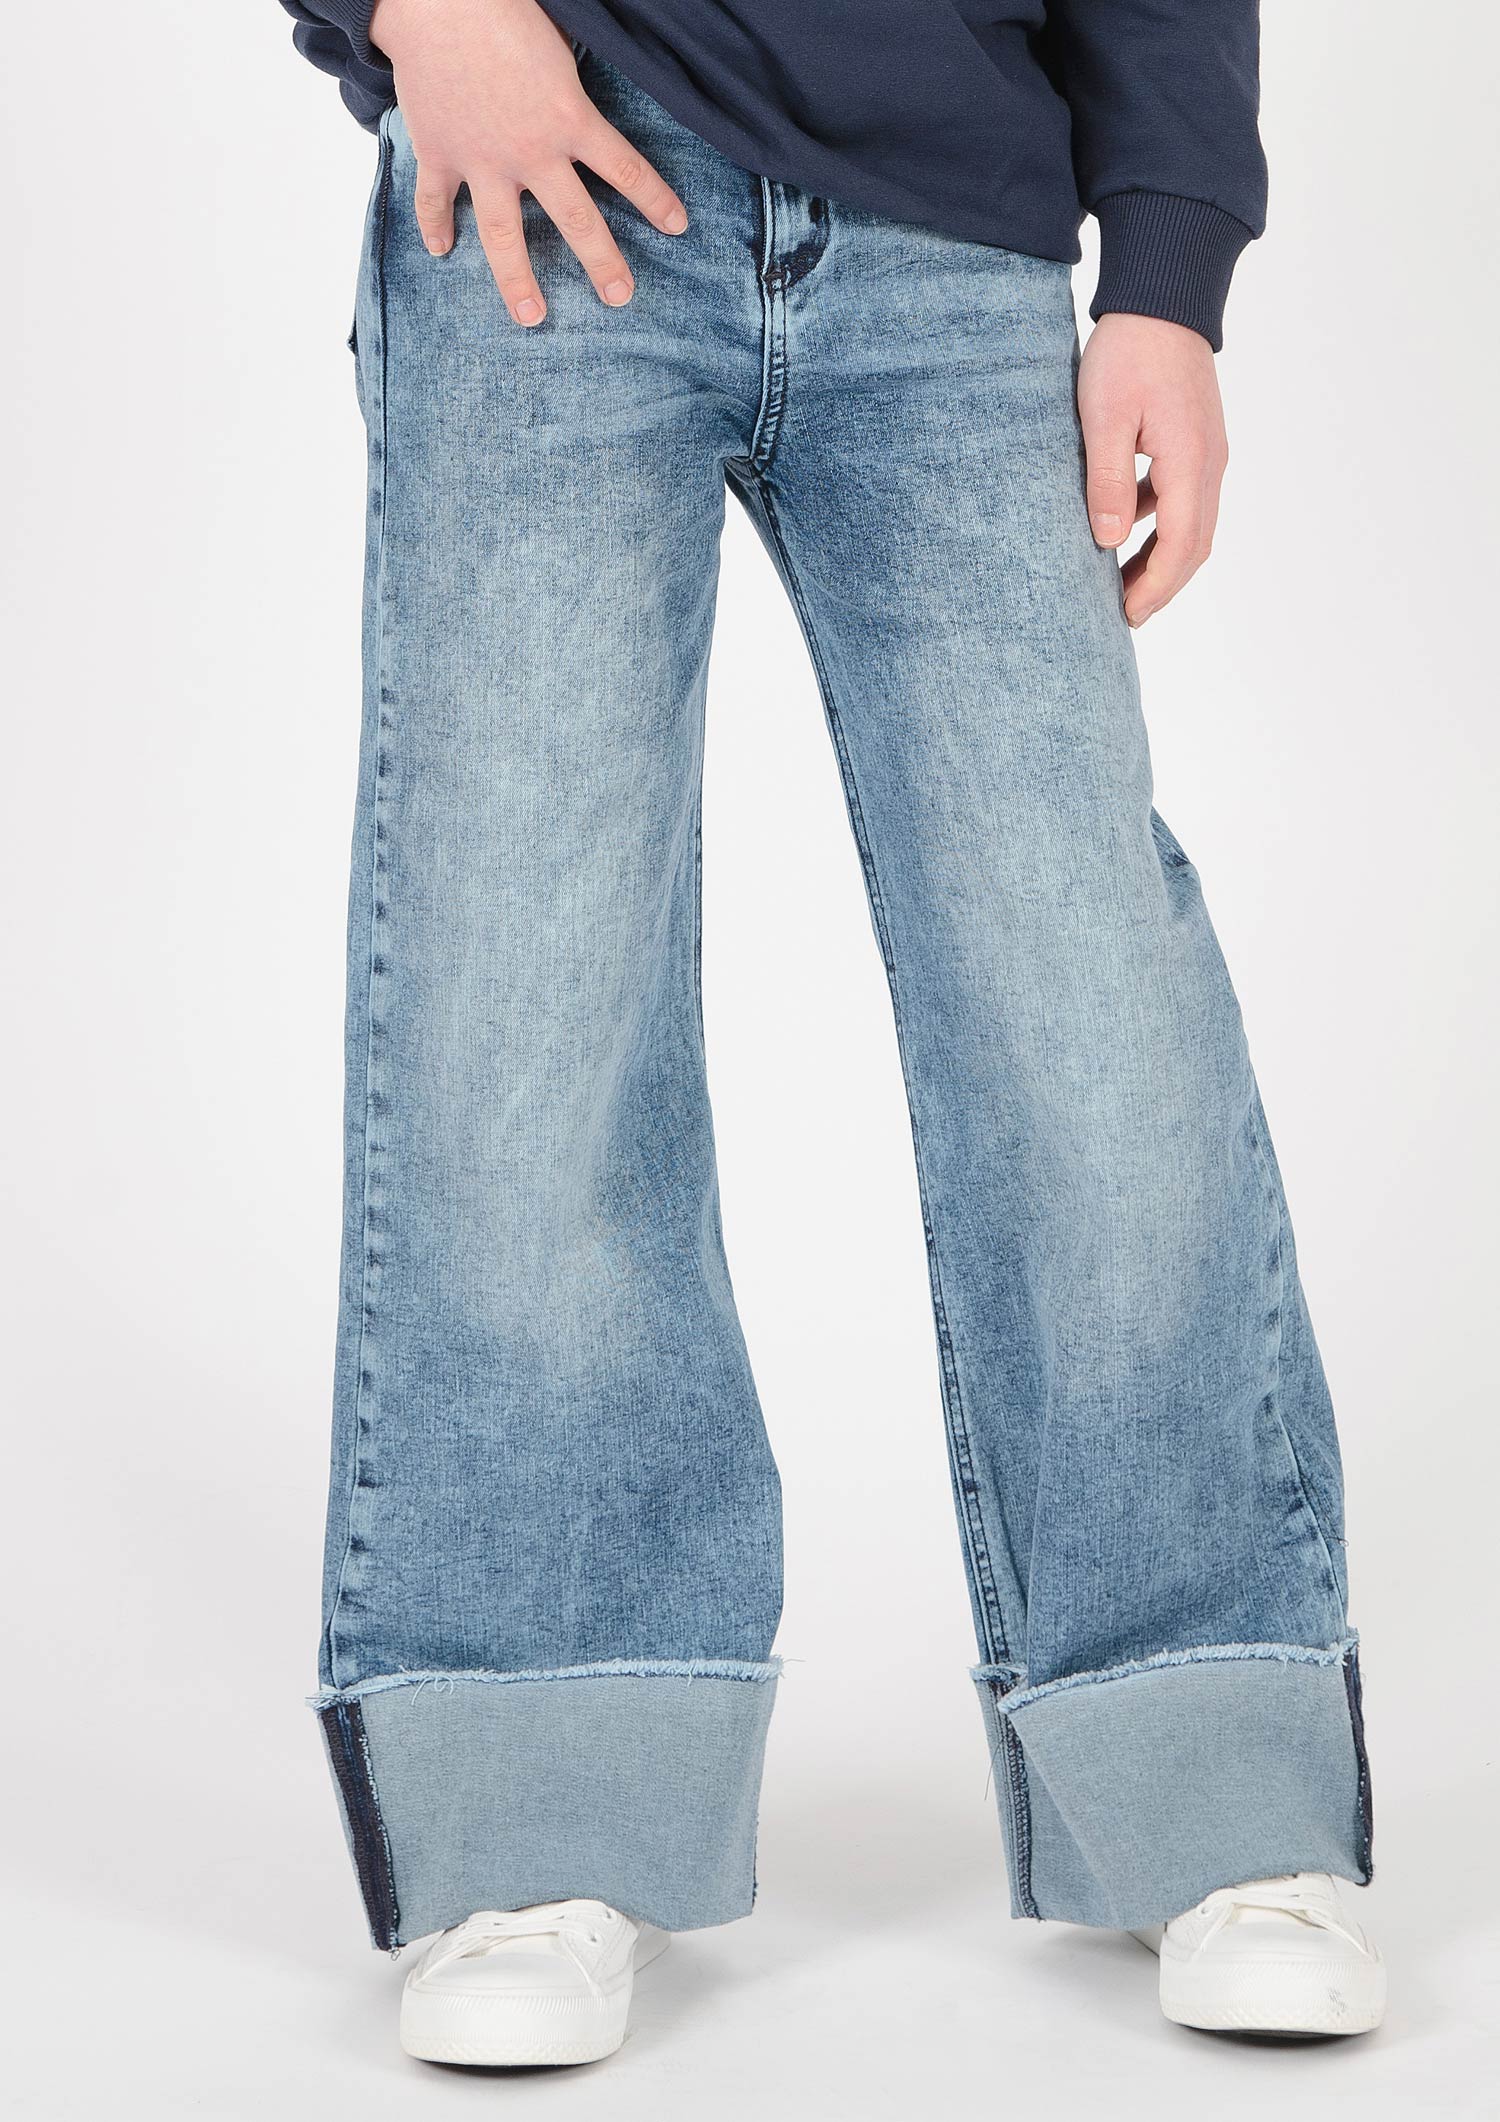 1327-Girls Straight Leg Jeans available in Slim,Normal